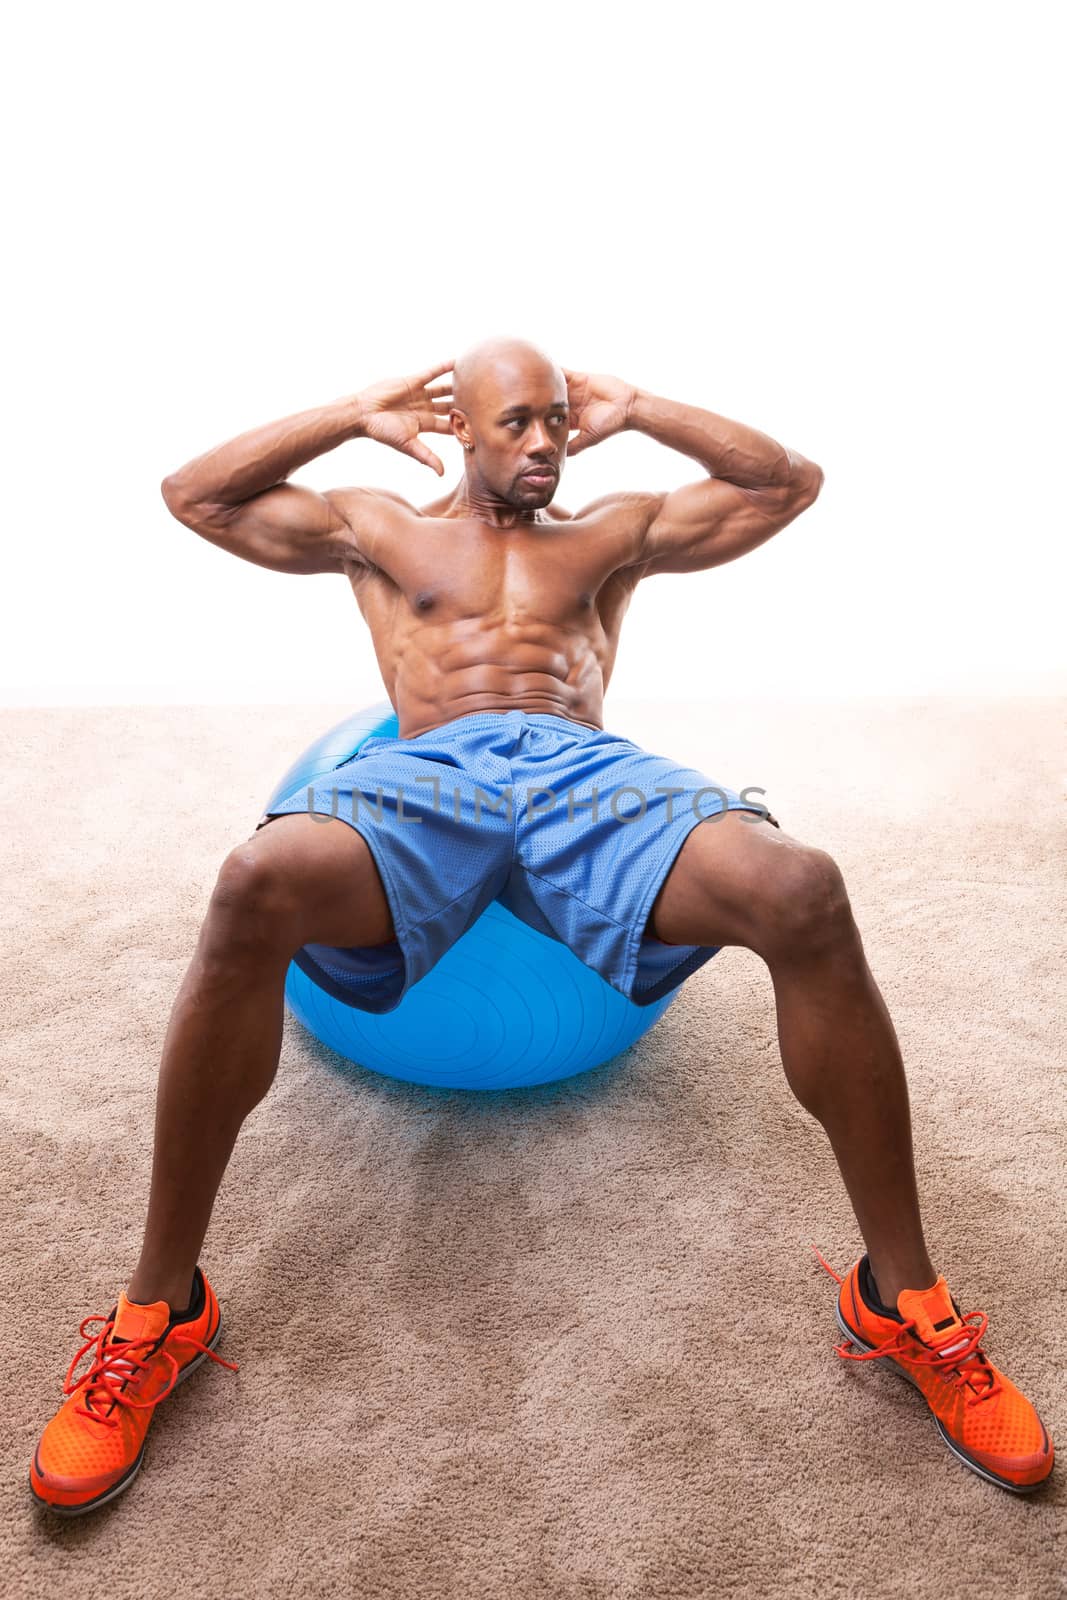 Muscular man doing ab crunches on an exercise ball.  